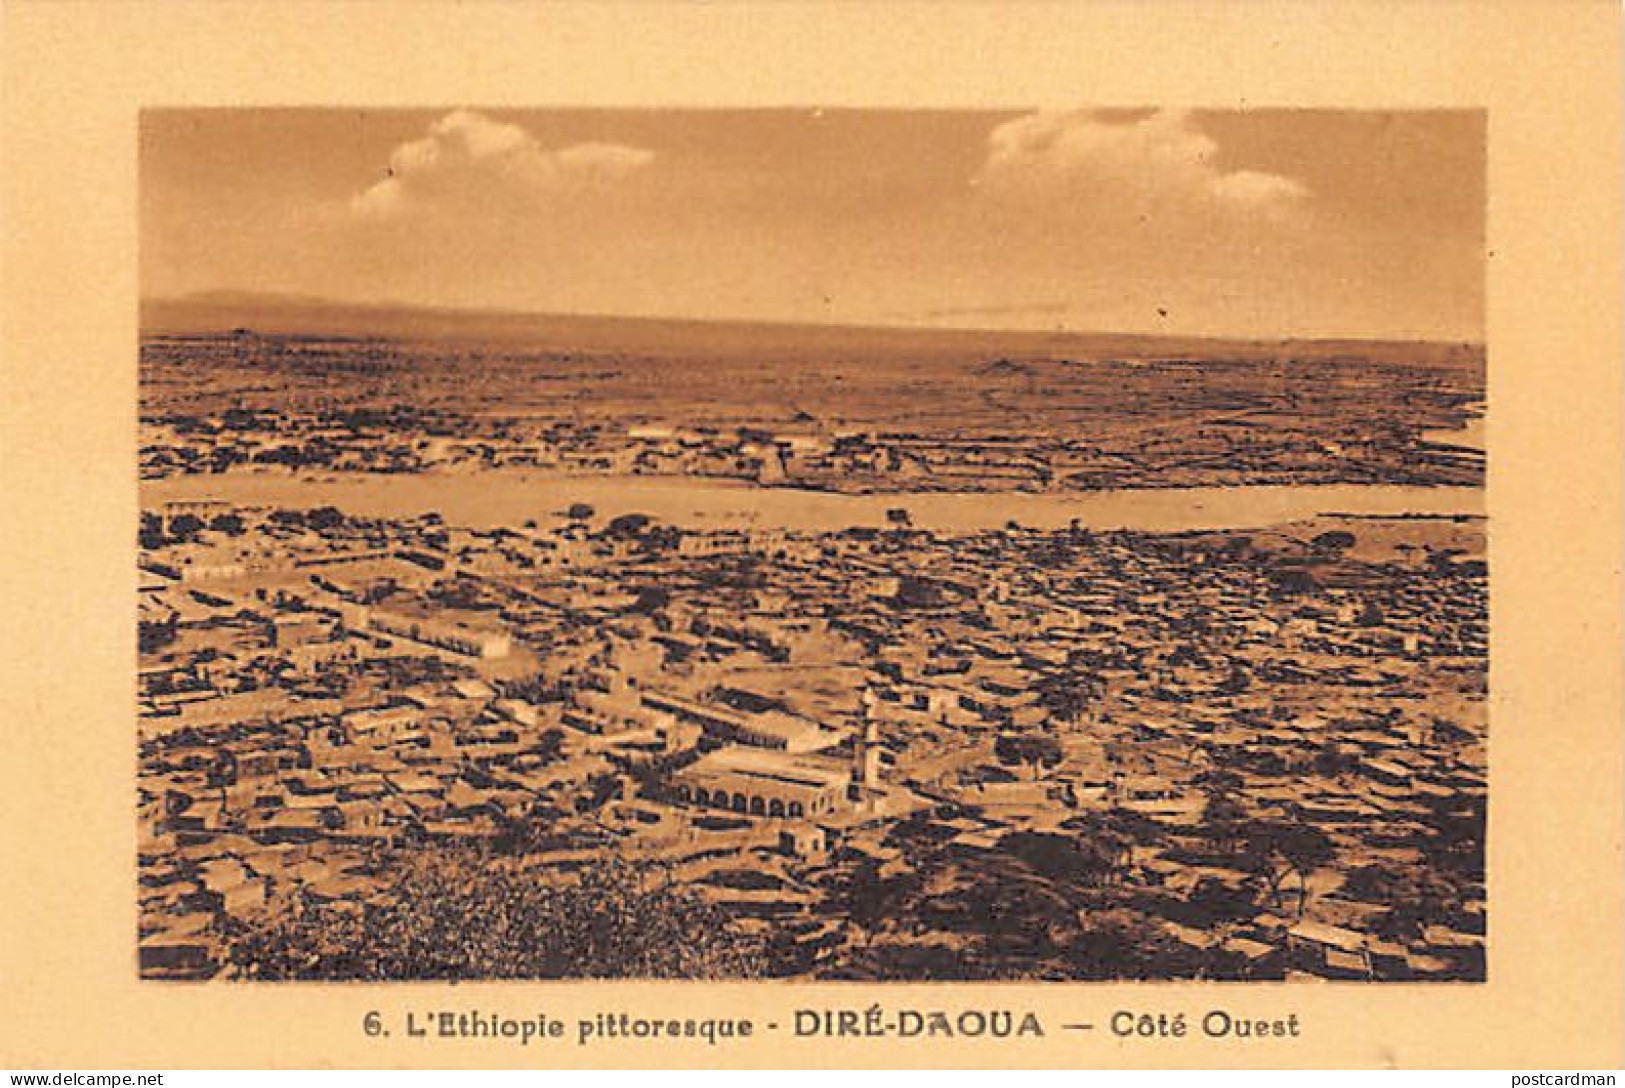 Ethiopia - DIRE DAWA - General View Of The West Side - Publ. Printing Works Of The Dire Dawa Catholic Mission - Photogra - Äthiopien